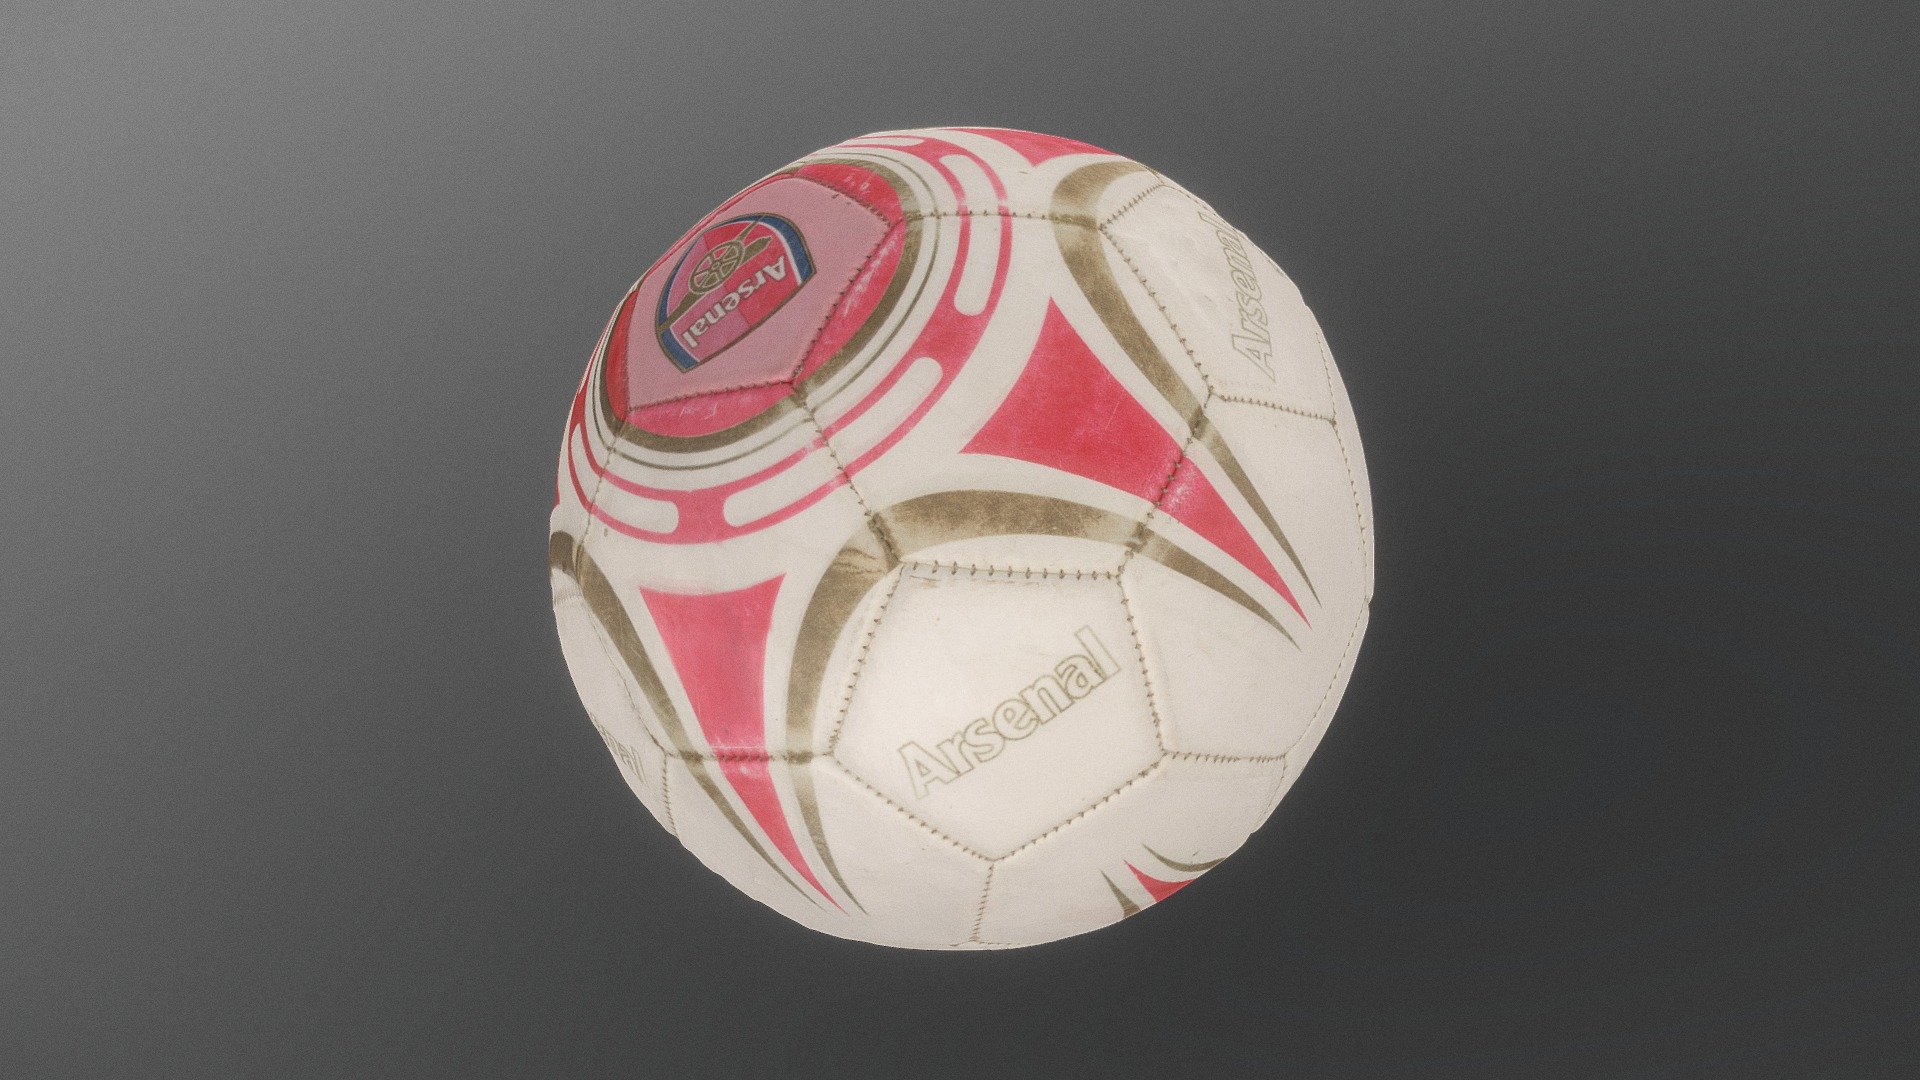 Arsenal FC London worn weathered torn leather soccer football ball

Photogrammetry scan 120x36MP - Arsenal football - Buy Royalty Free 3D model by matousekfoto 3d model